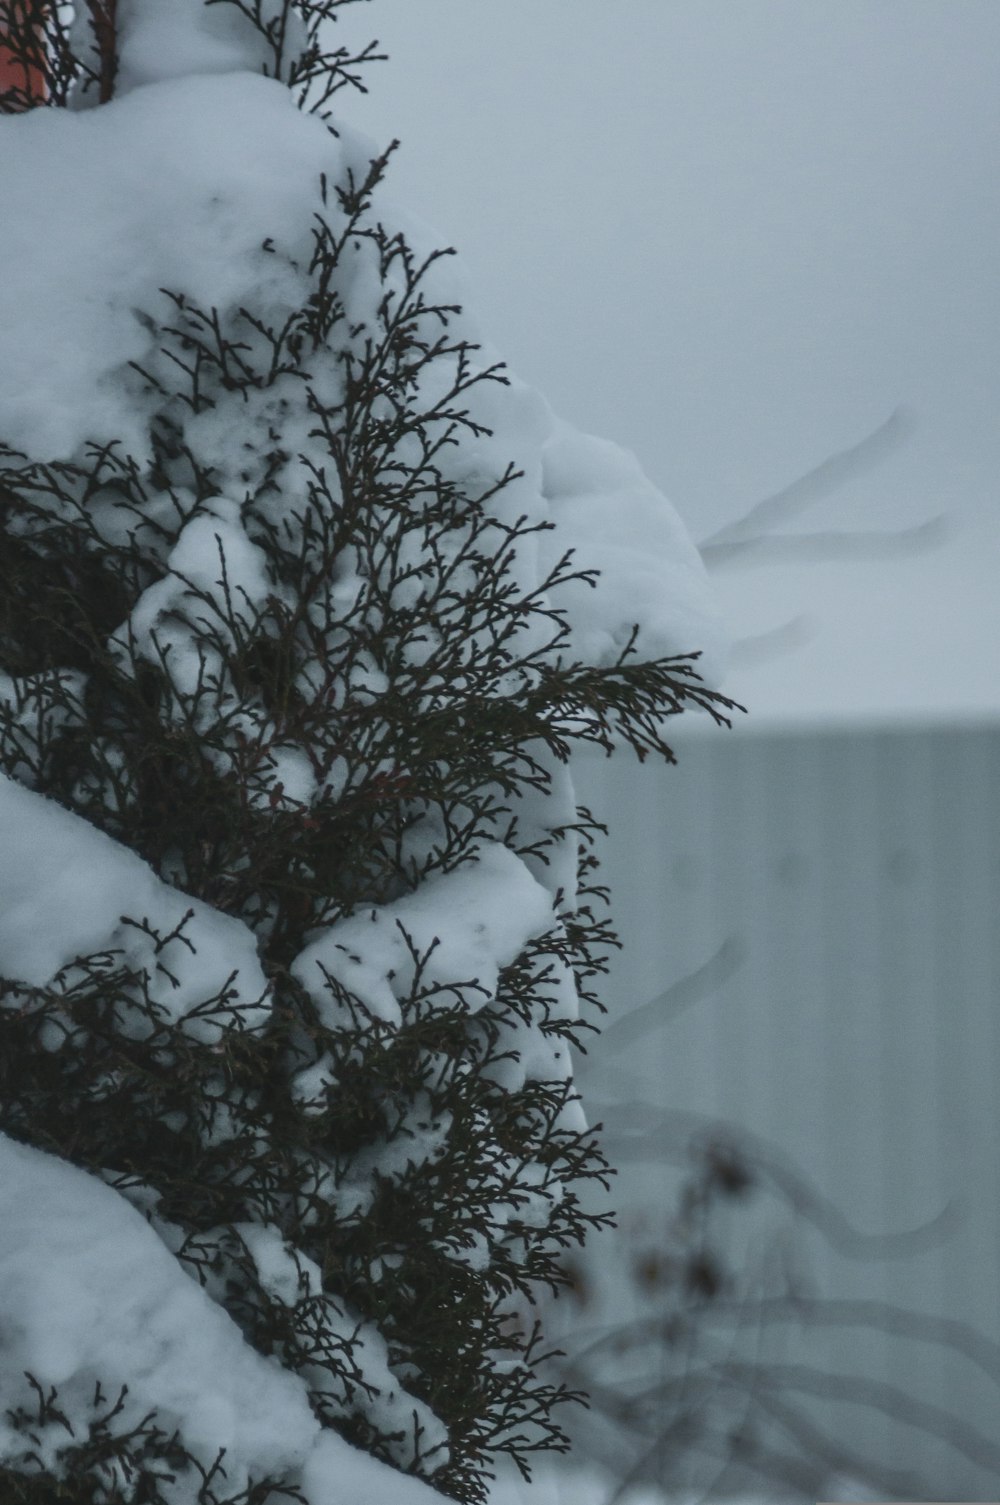 a bird perched on a tree branch covered in snow